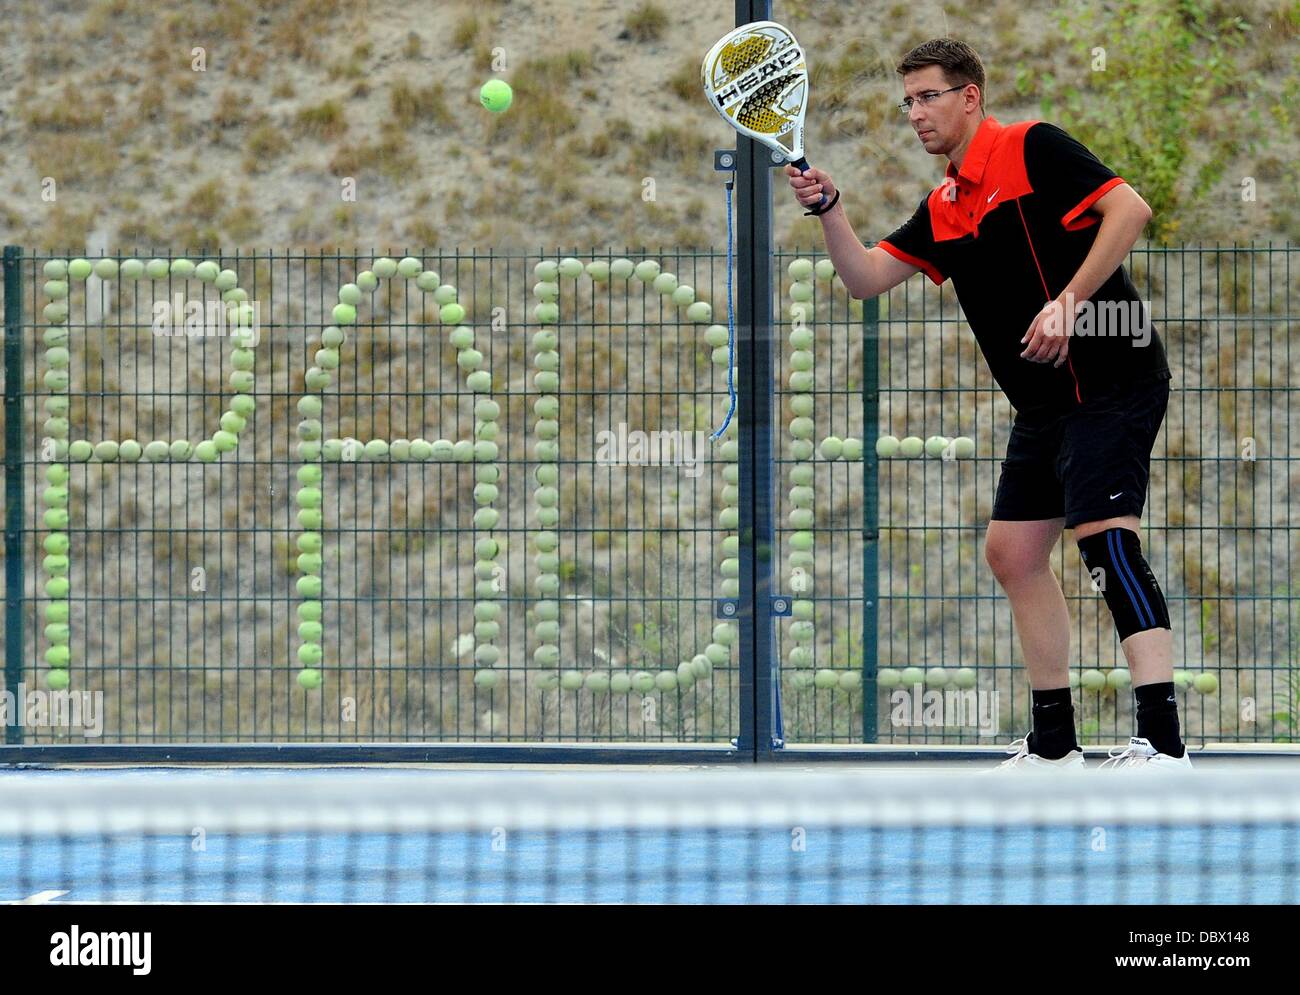 A man returns the ball during a match of padel tennis in Berlin, Germany, 24 July 2013. Photo: Britta Pedersen Stock Photo